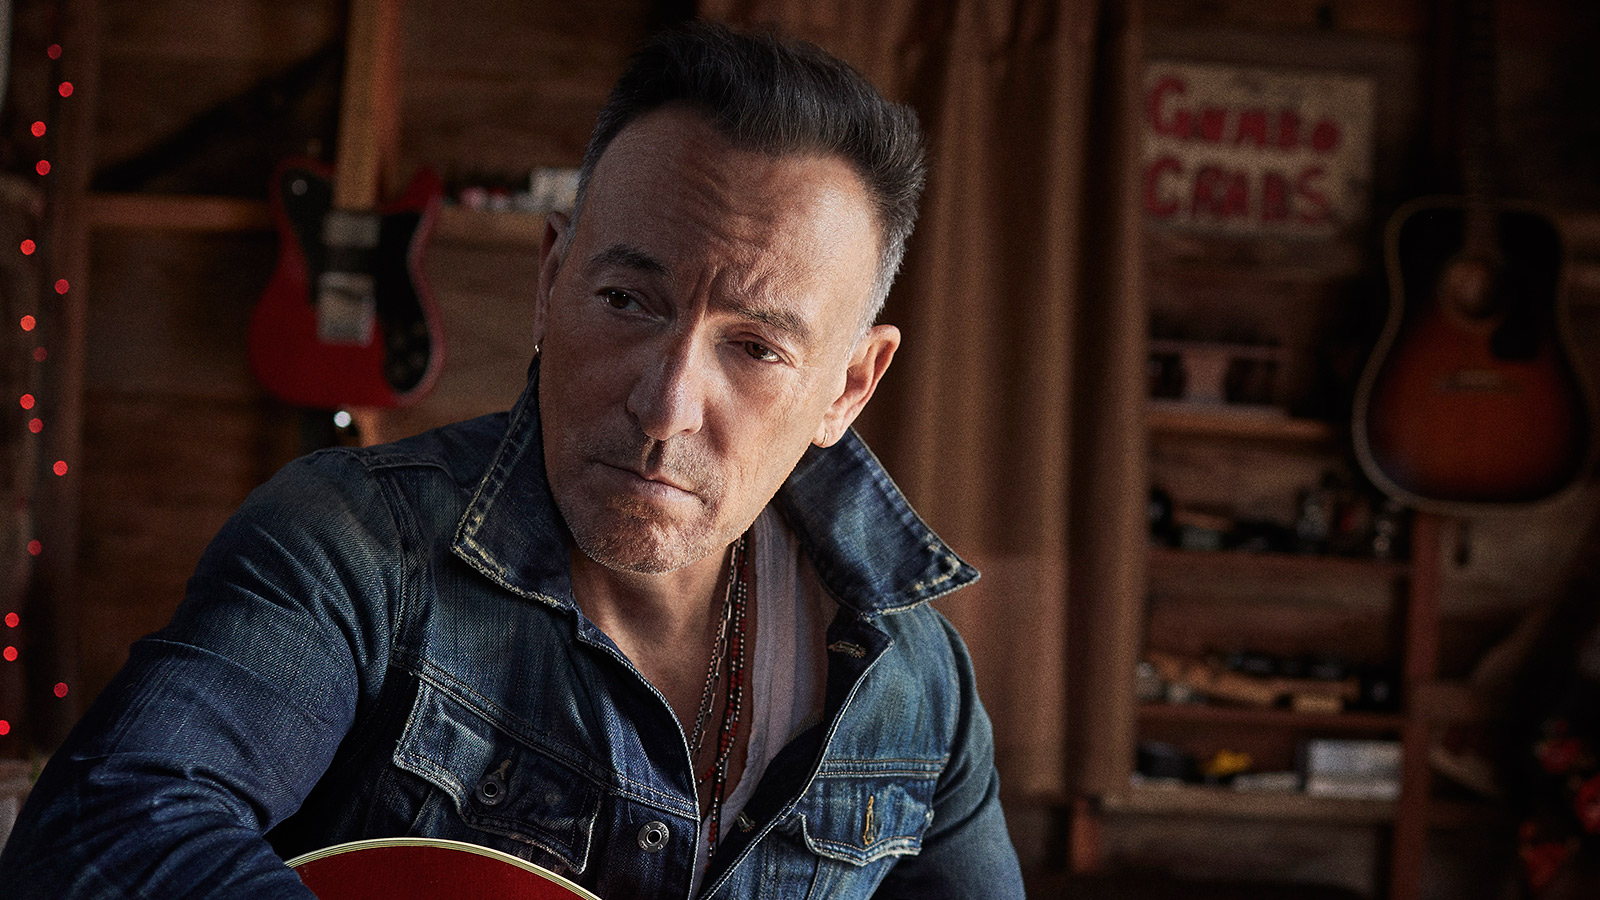 Springsteen embraces veterans and the question of patriotism. (Danny Clinch)